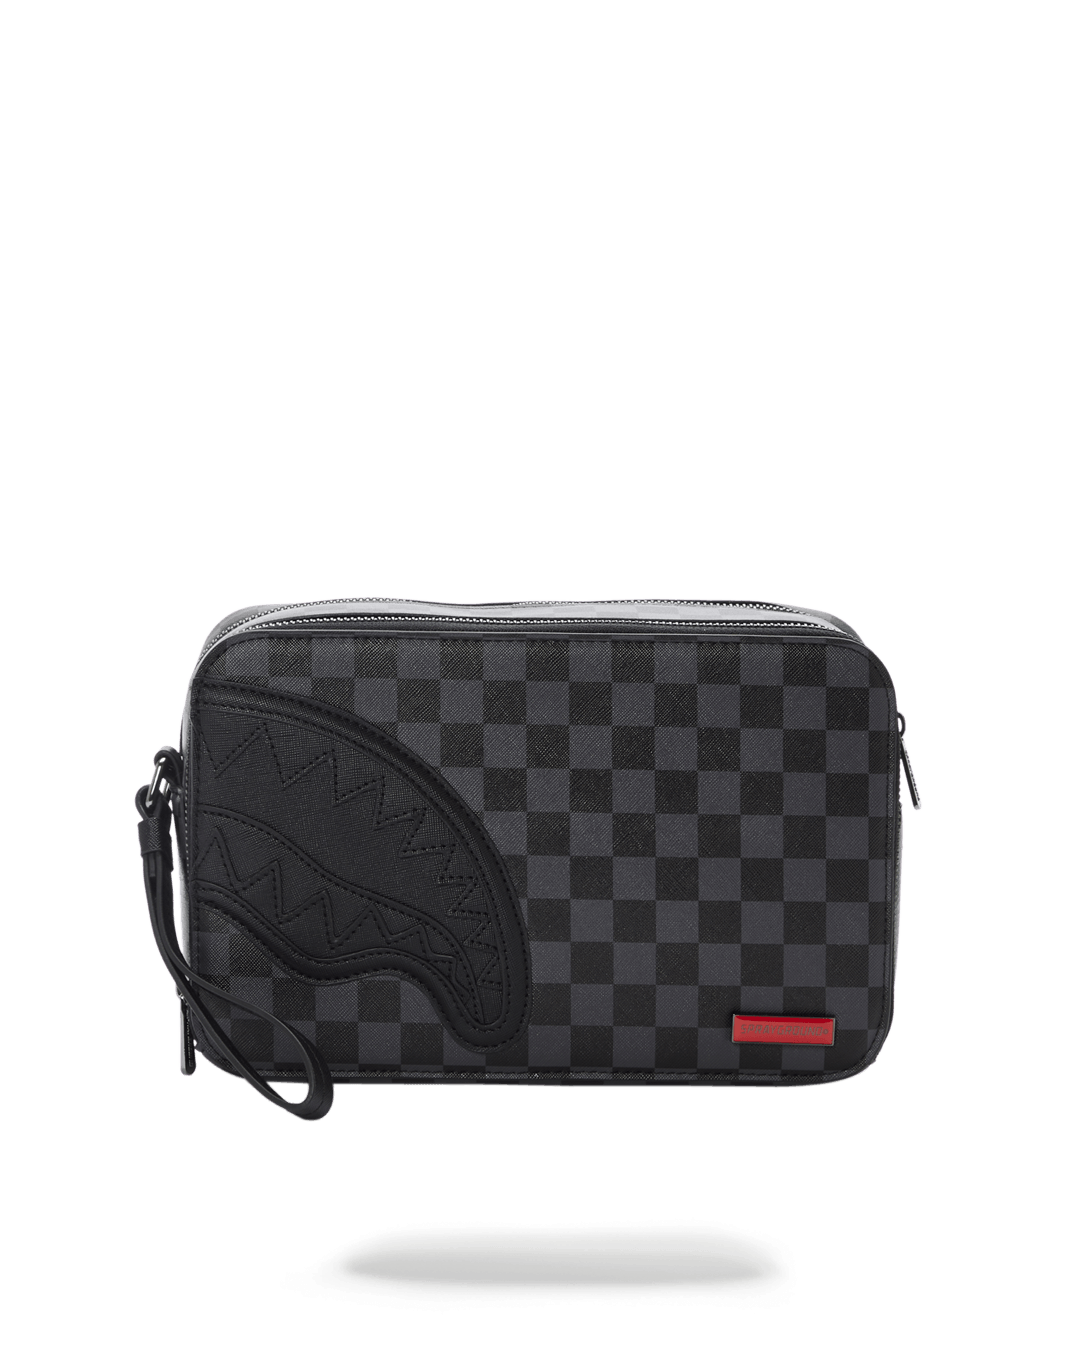 HENNY BLACK TOILETRY BAG - HIGH QUALITY AND INEXPENSIVE - HENNY BLACK TOILETRY BAG HIGH QUALITY AND INEXPENSIVE-01-0